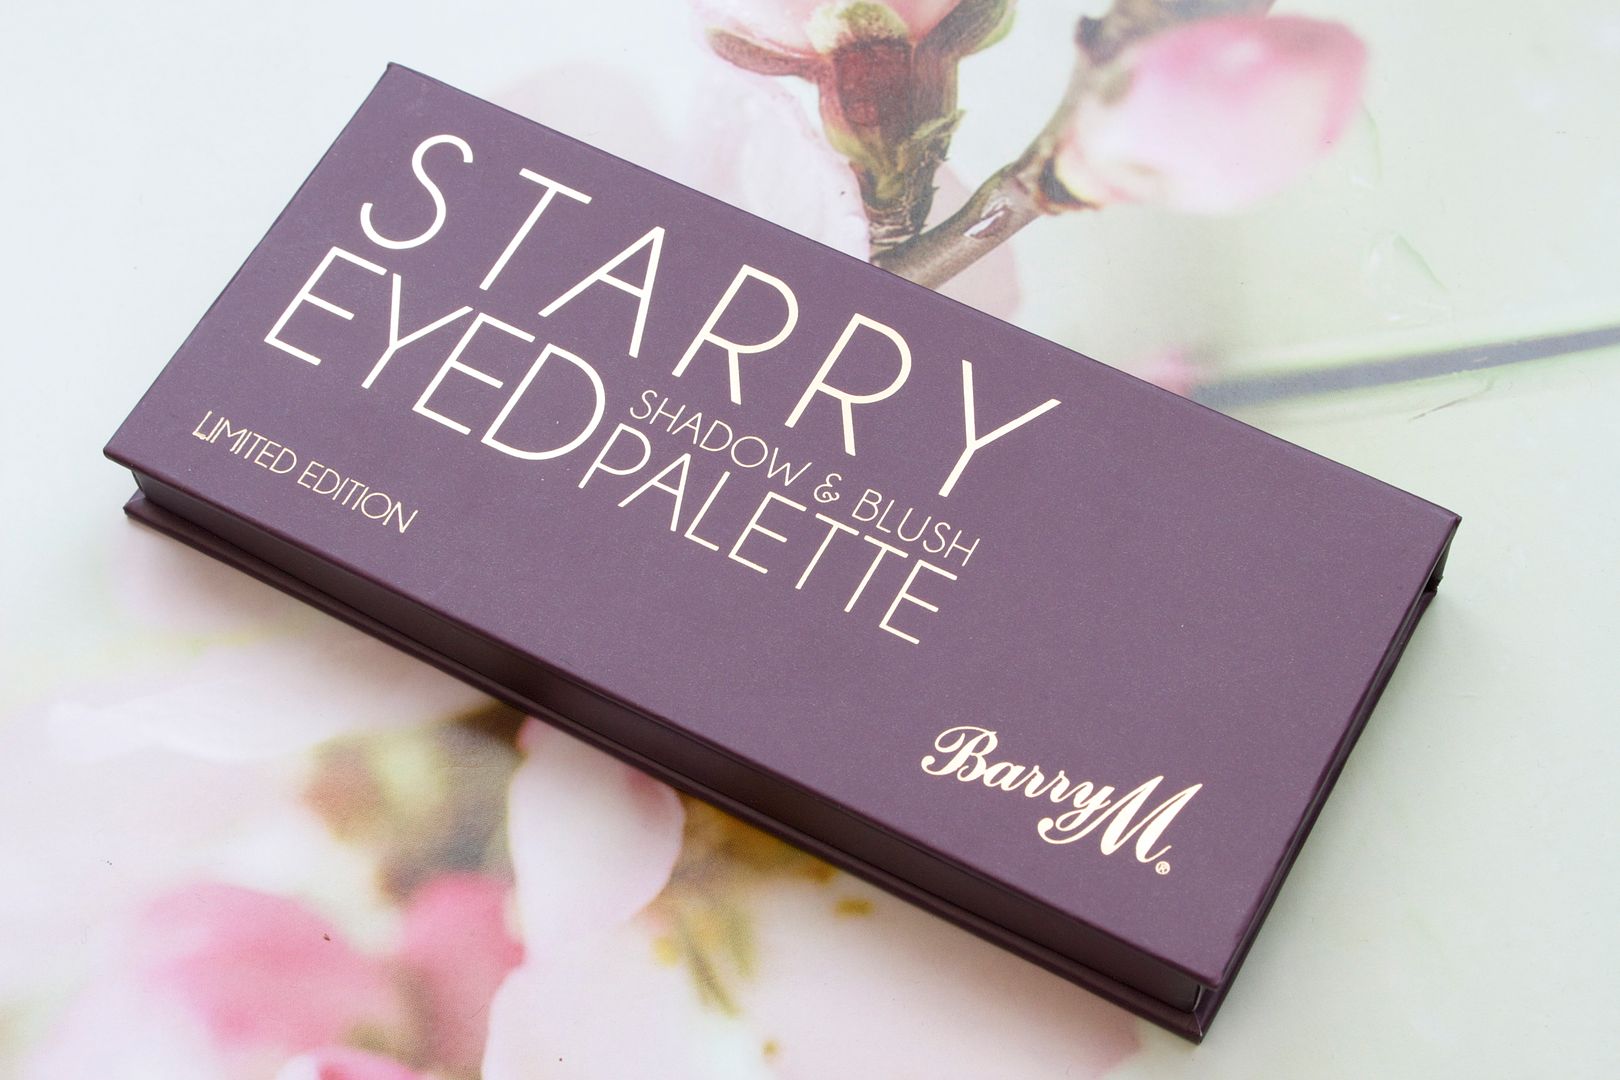 Barry M Starry Eyed Shadow & Blush Palette